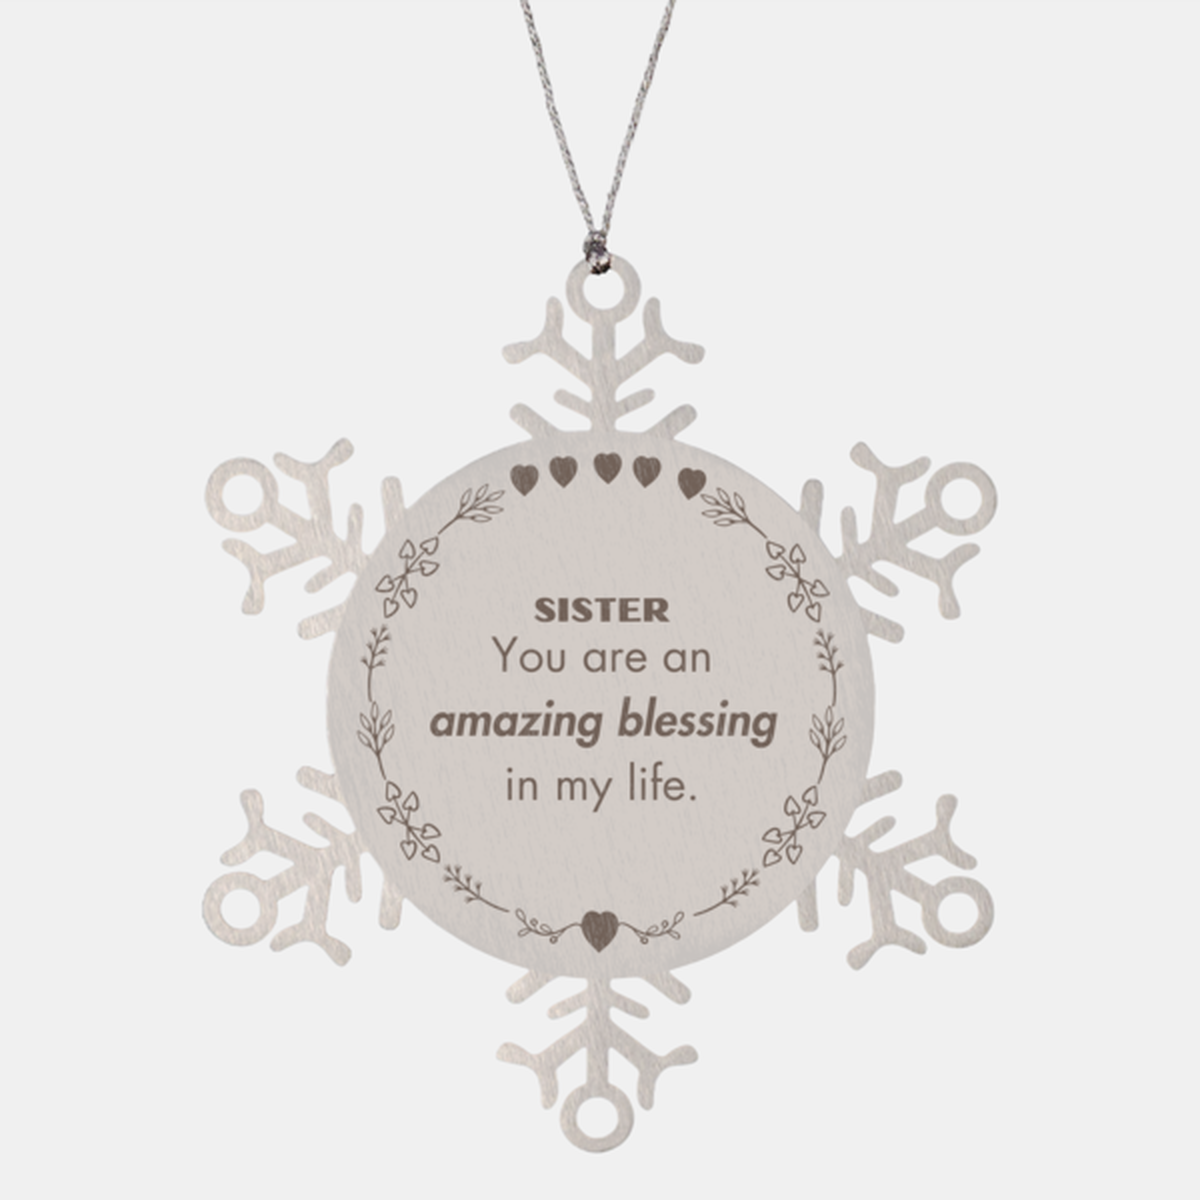 Sister Snowflake Ornament, You are an amazing blessing in my life, Thank You Gifts For Sister, Inspirational Birthday Christmas Unique Gifts For Sister